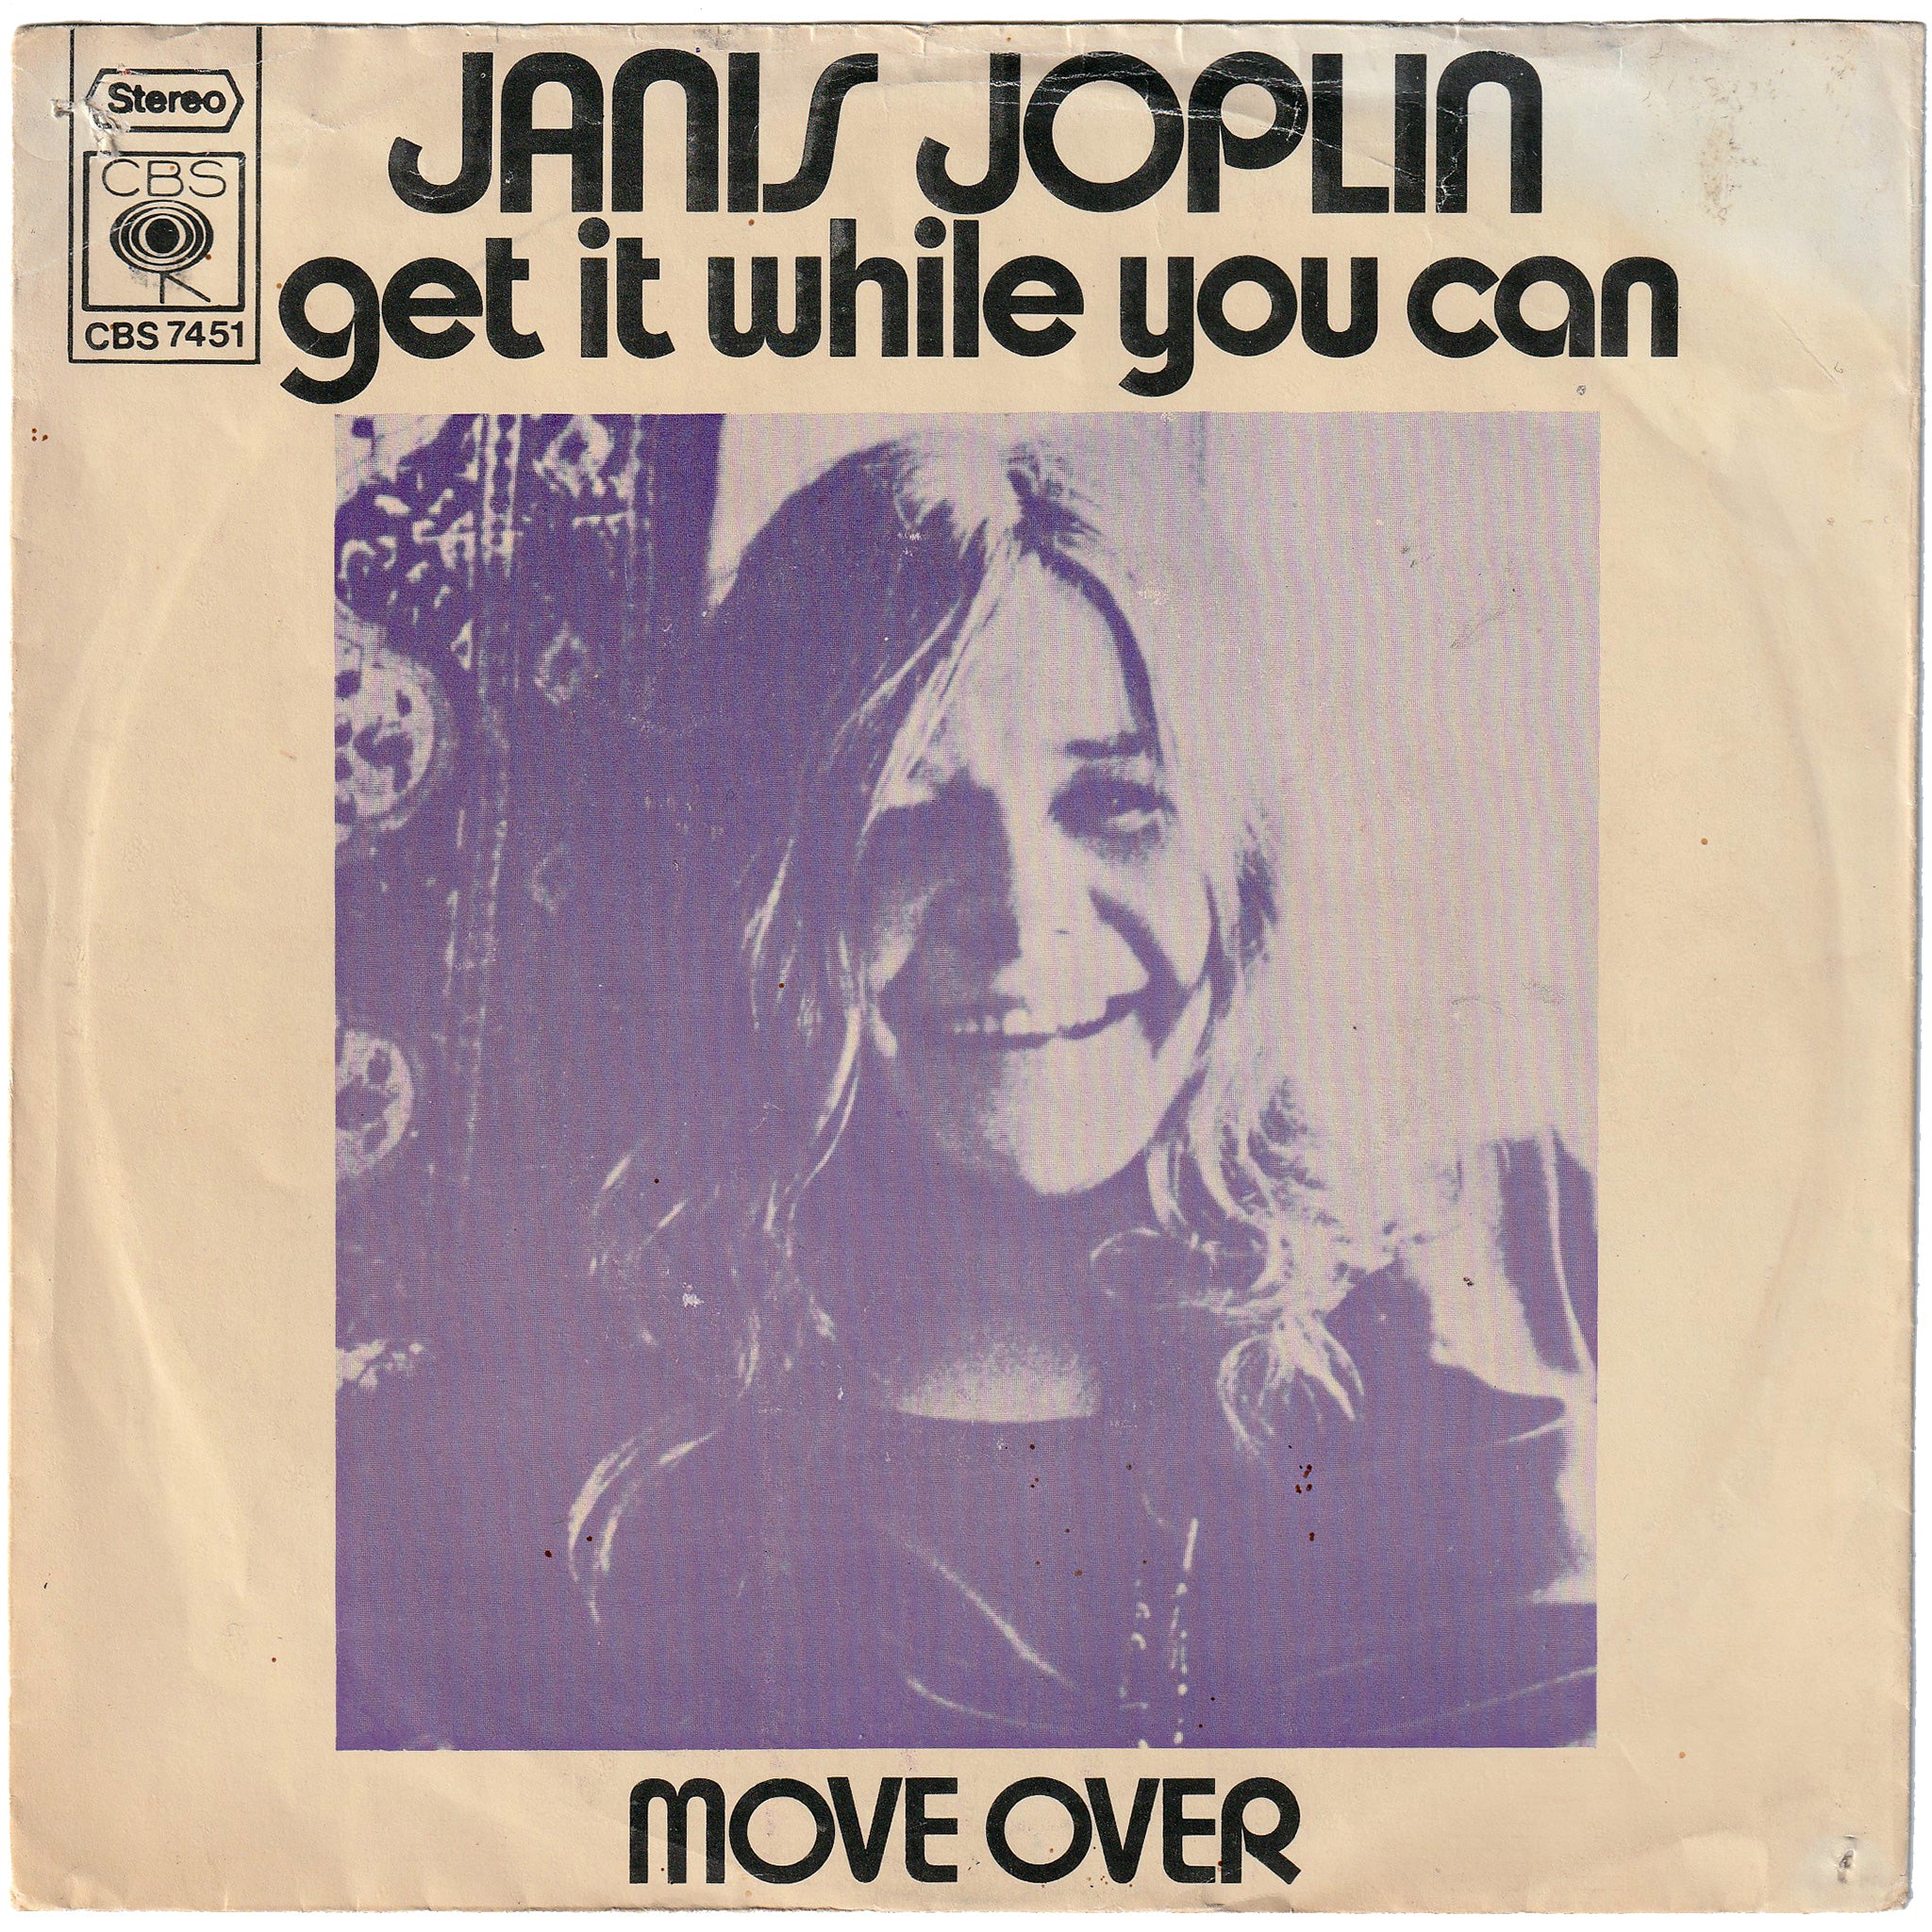 Janis Joplin - Move Over / Get It While You Can [Netherland CBS label]